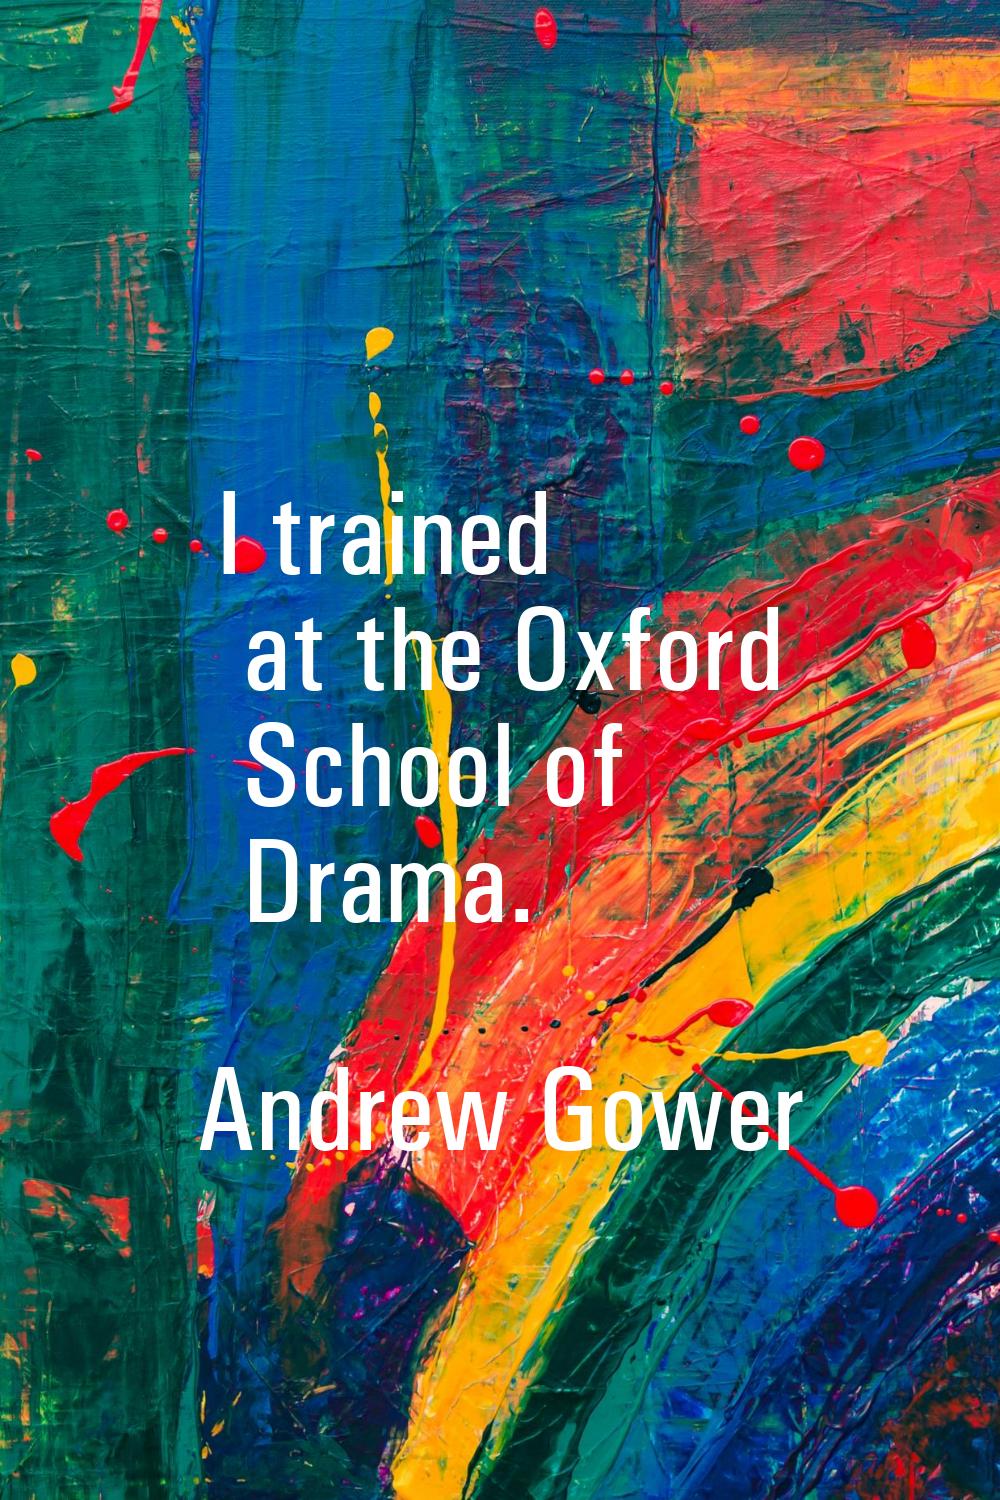 I trained at the Oxford School of Drama.